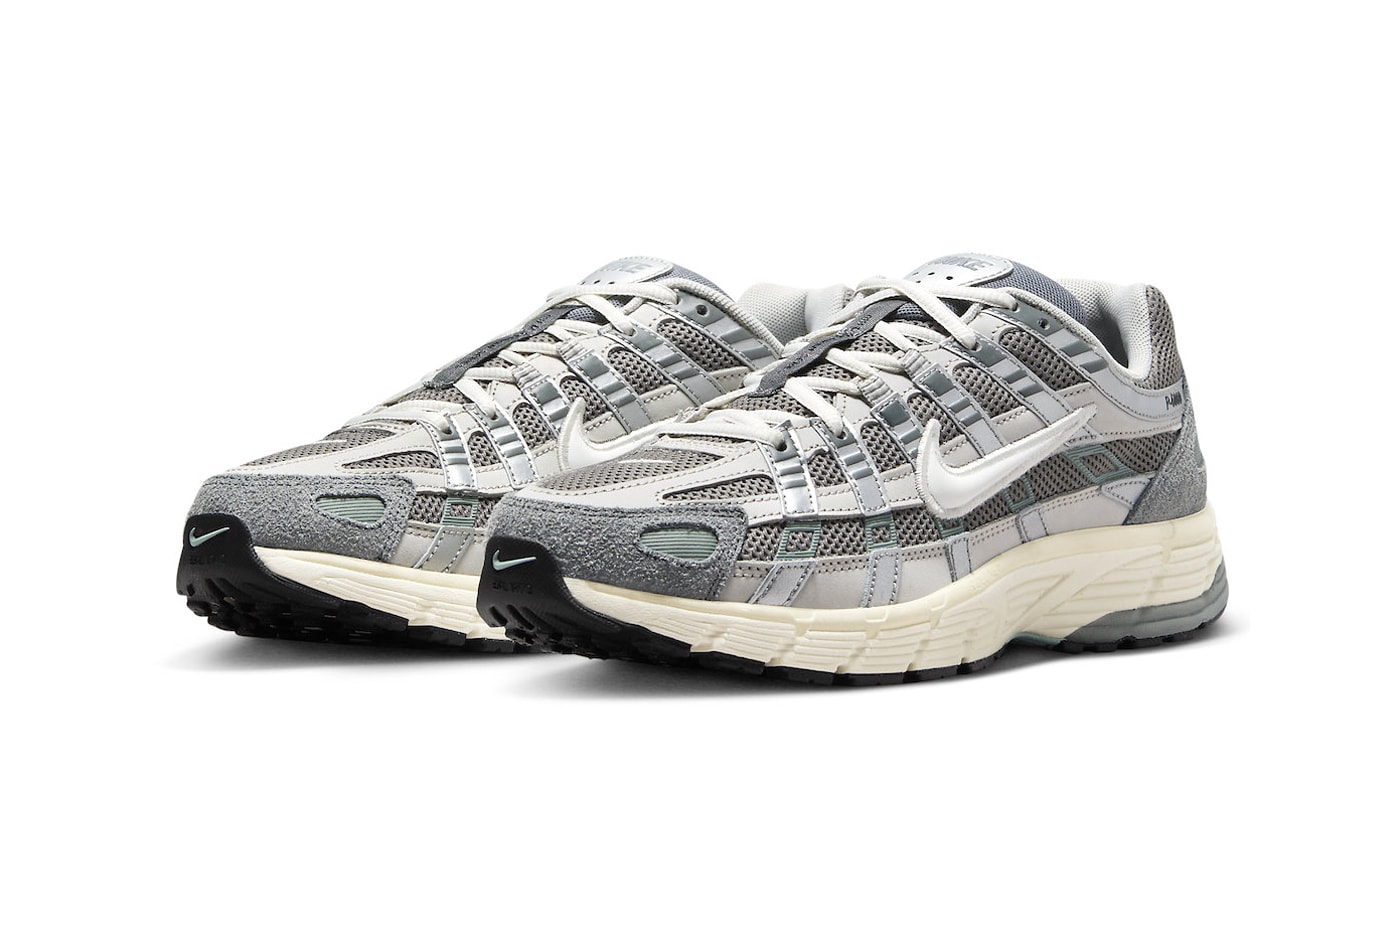 Nike P-6000 "Flat Pewter" Is Set To Arrive by the End of the Year holiday 2023 Flat Pewter/Light Iron Ore-Metallic Silver-White technical shoe runners swoosh